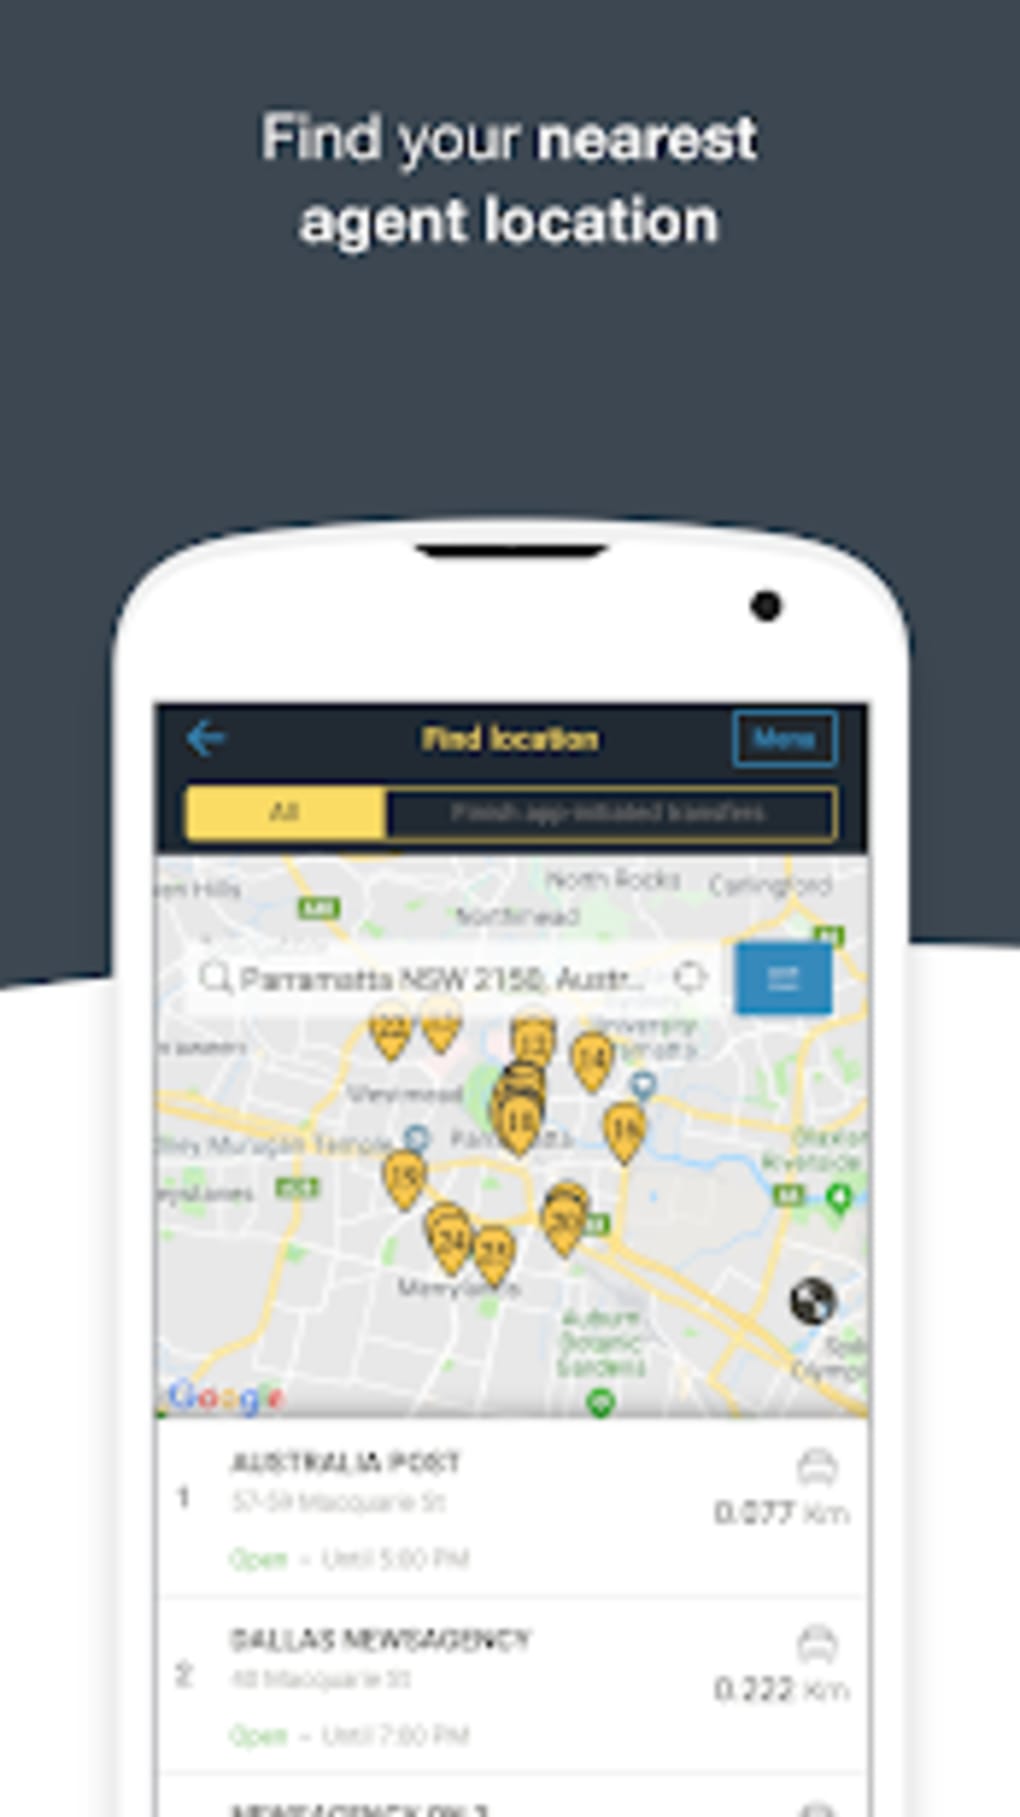 Western Union Au Send Money Transfers Quickly For Android Download - western union au send money transfers quickly